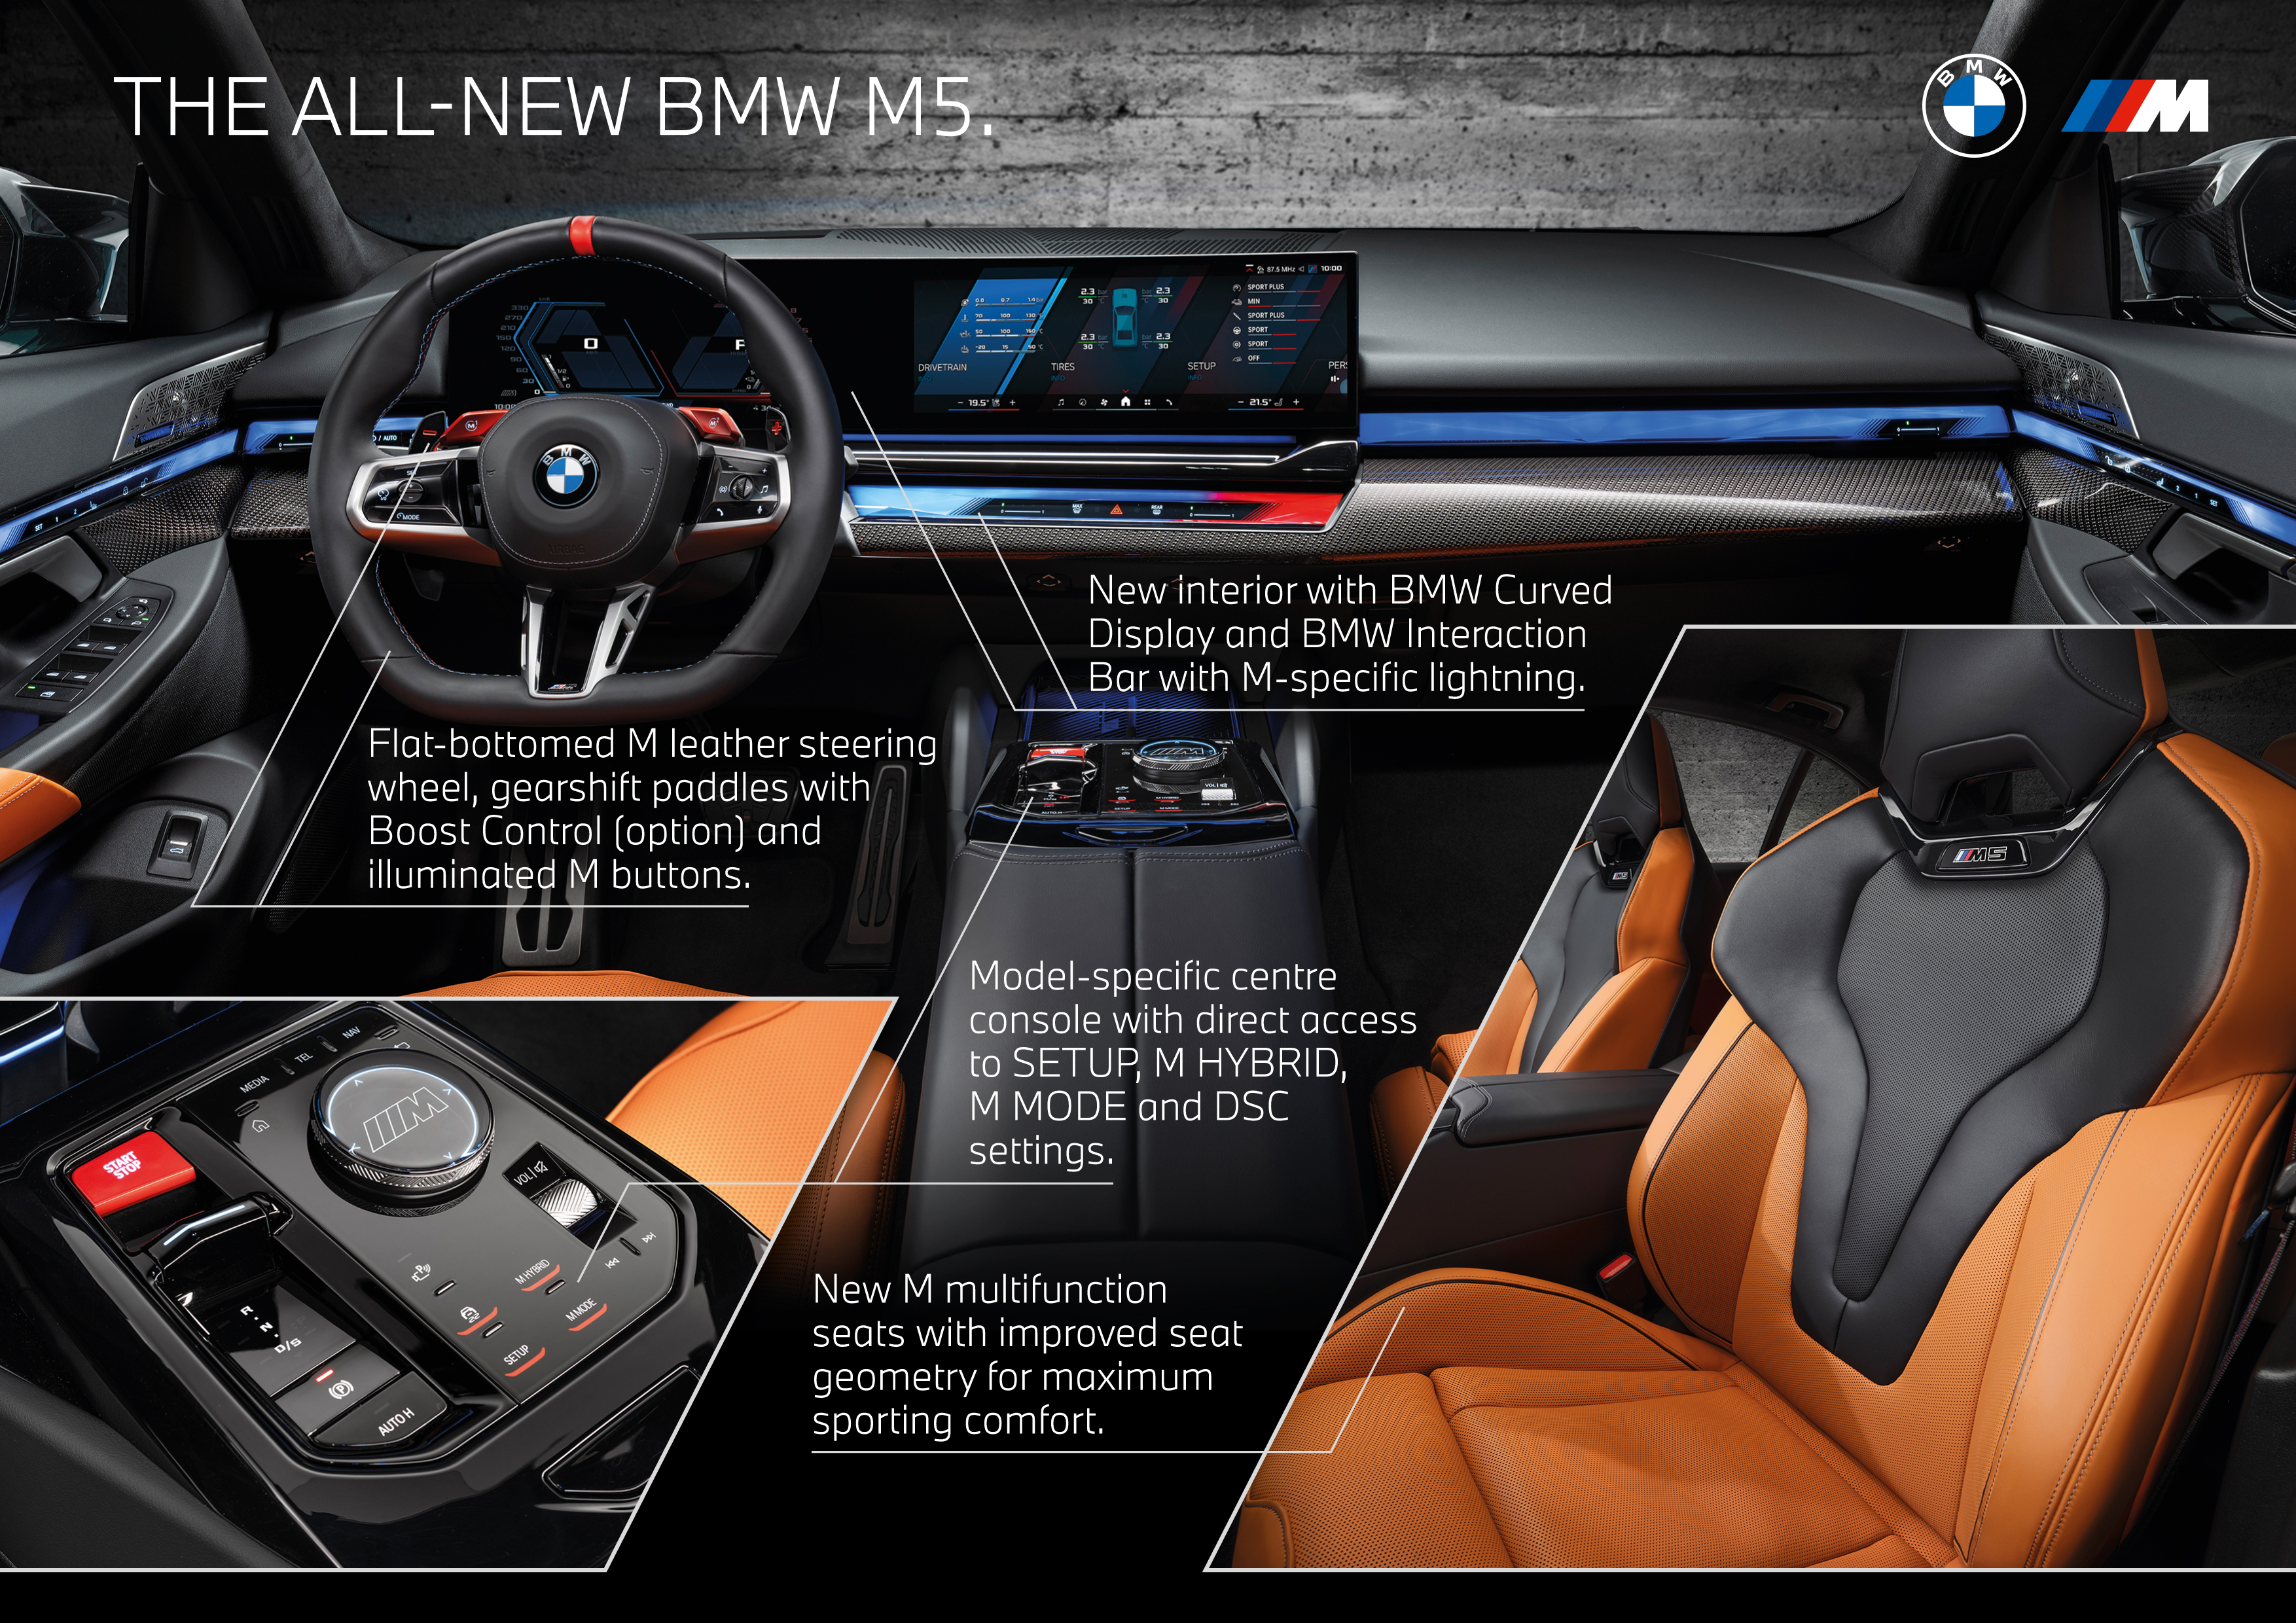 P90557577_highRes_the-all-new-bmw-m5-h.jpg